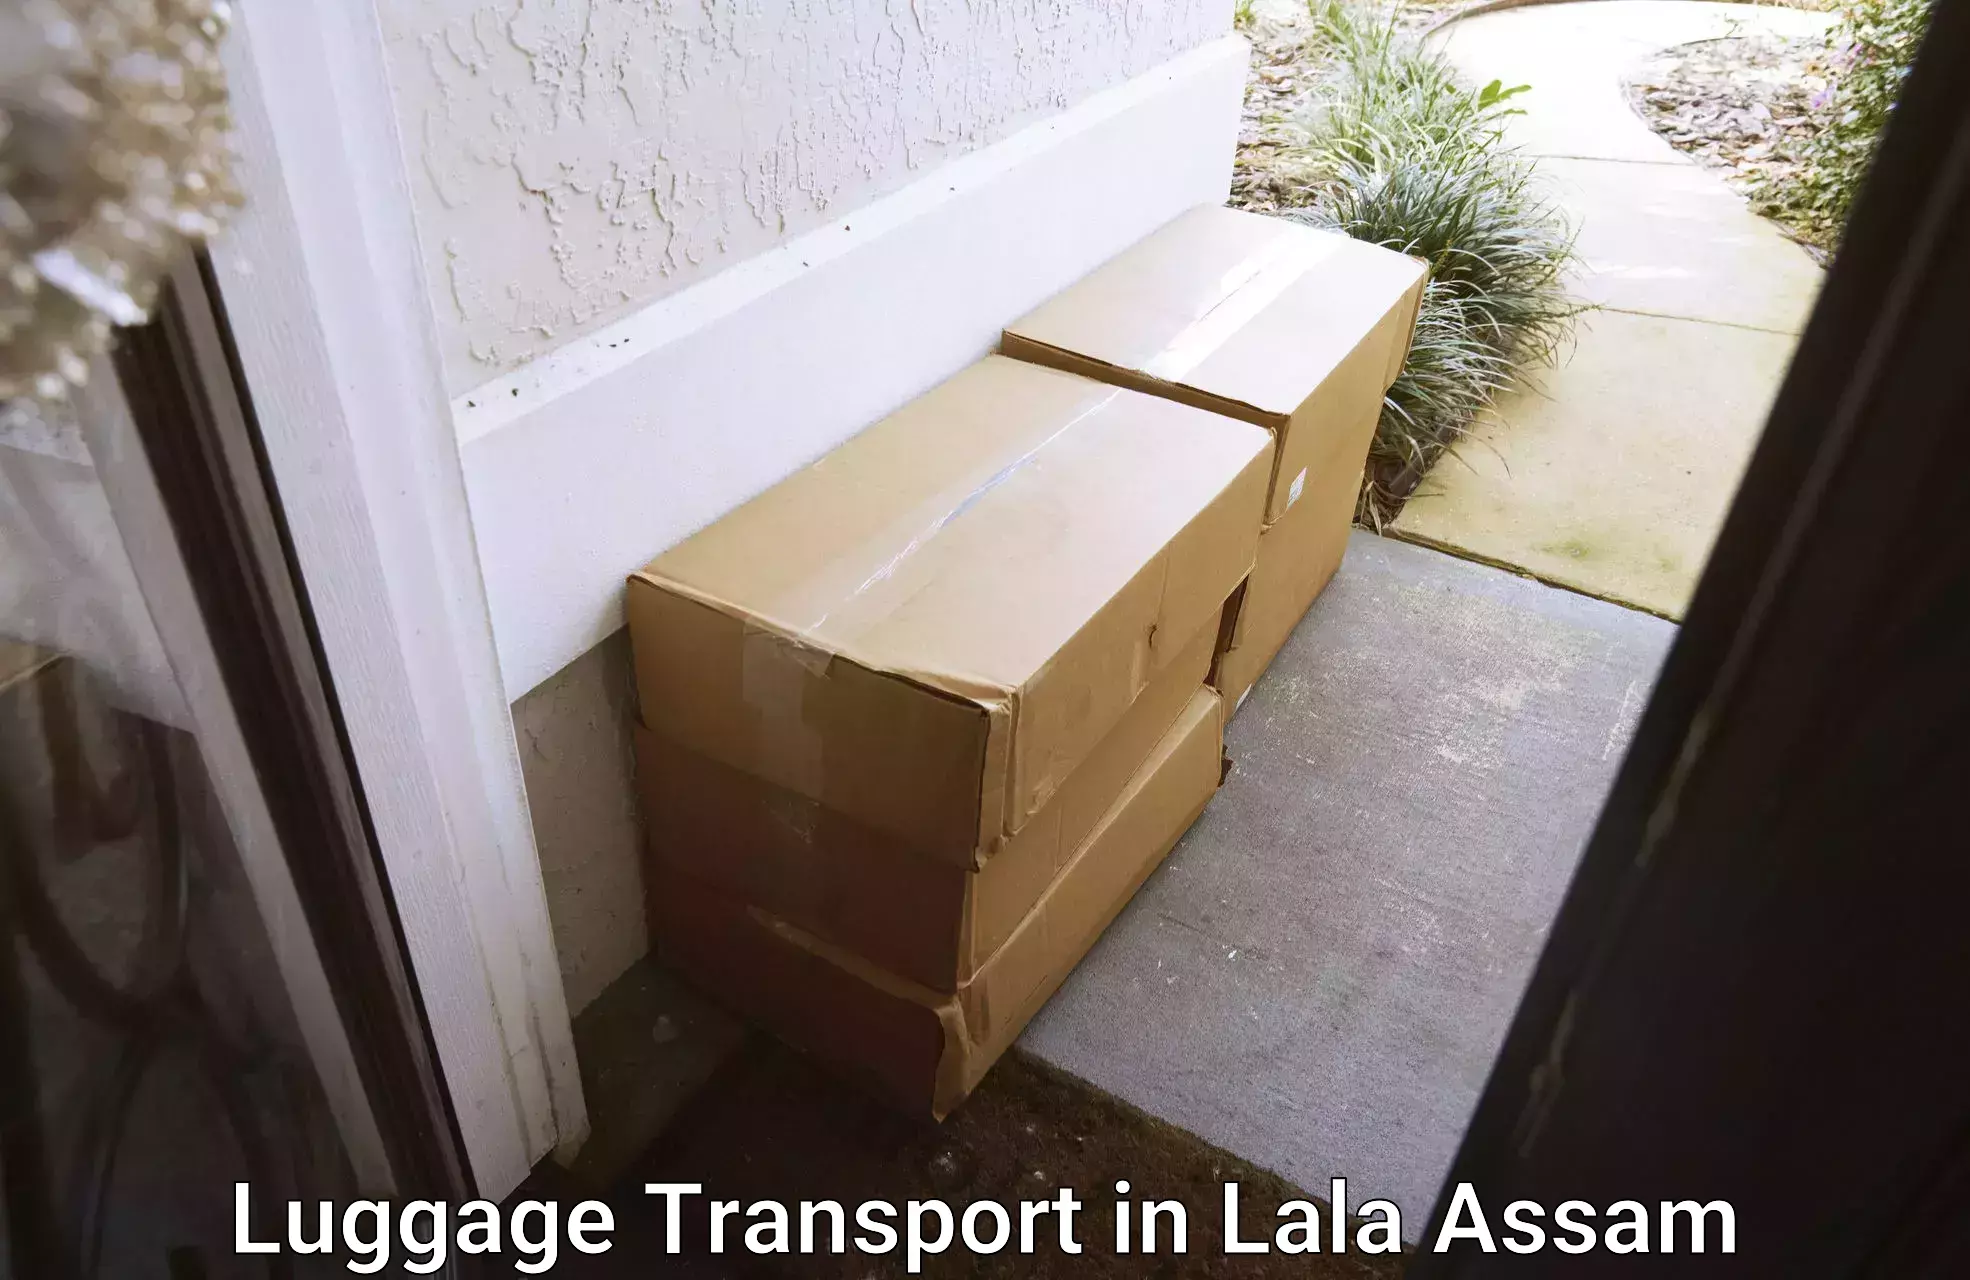 Baggage shipping advice in Lala Assam